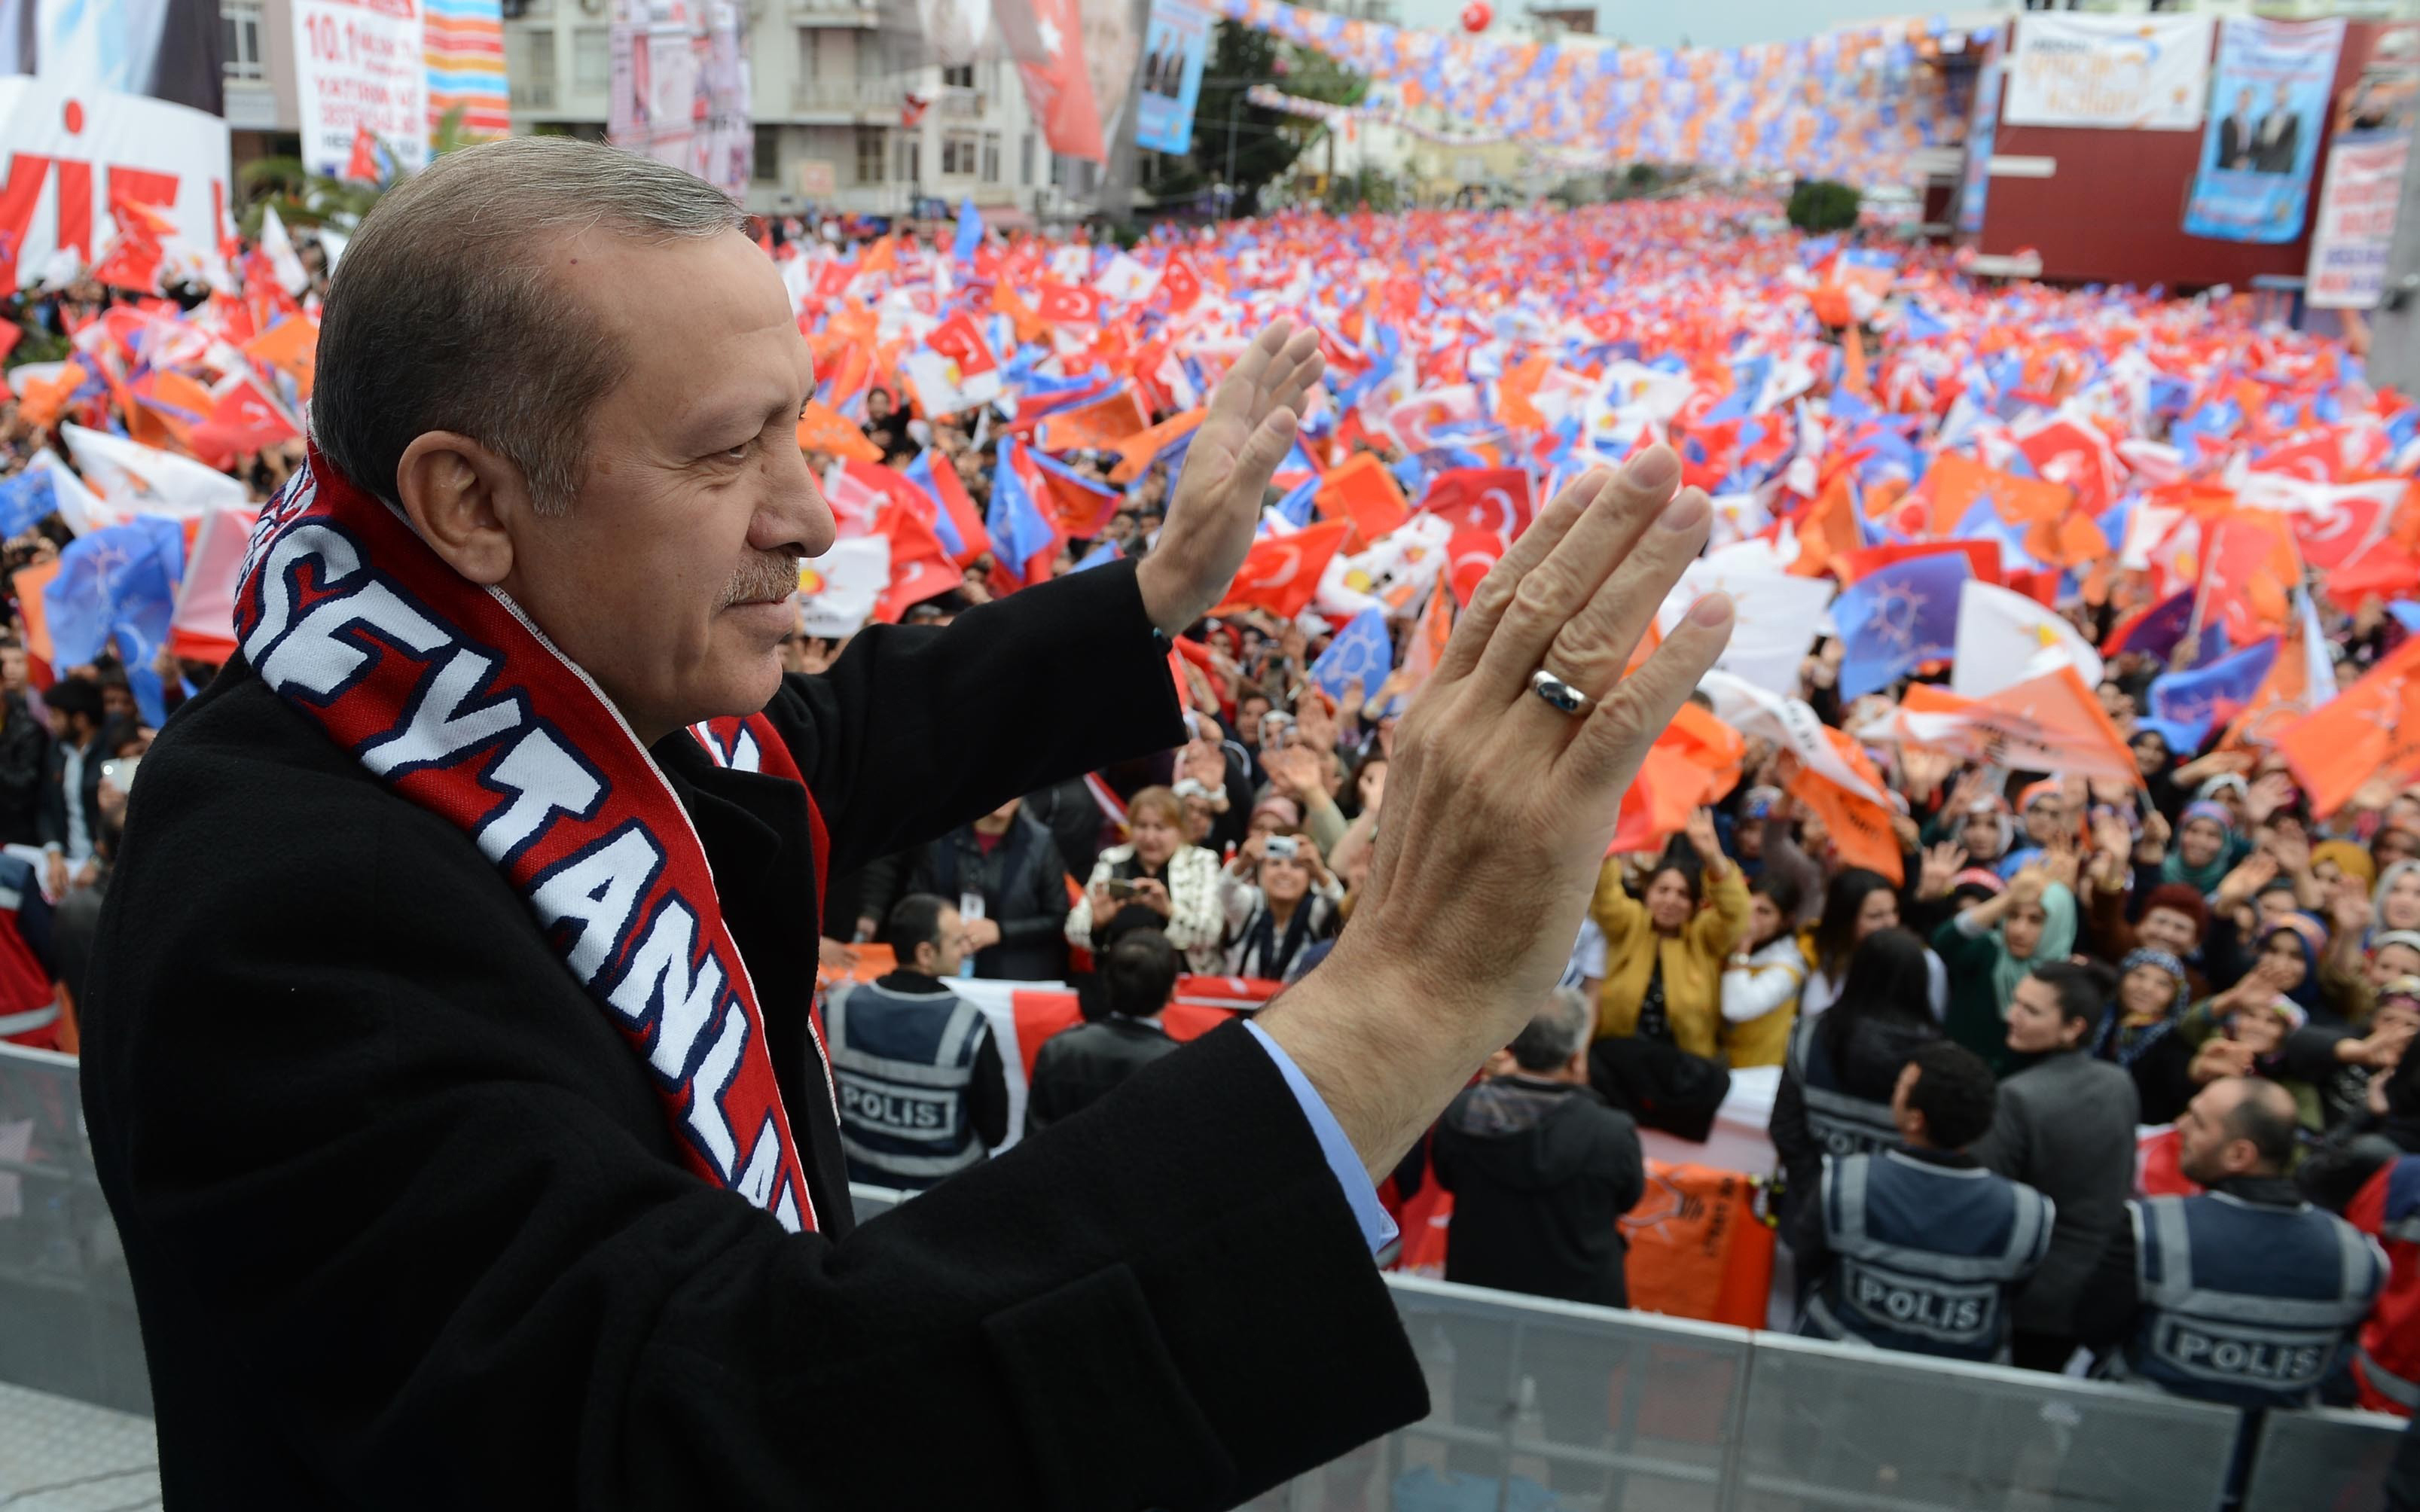 Turkish Prime Minister Recep Tayyip Erdogan greets the crowd during a local election rally organized by the ruling Justice and Development Party (AKP) in Mersin, Turkey on March 13, 2014 (Kayhan Ozer—Anadolu Agency/Getty Images)